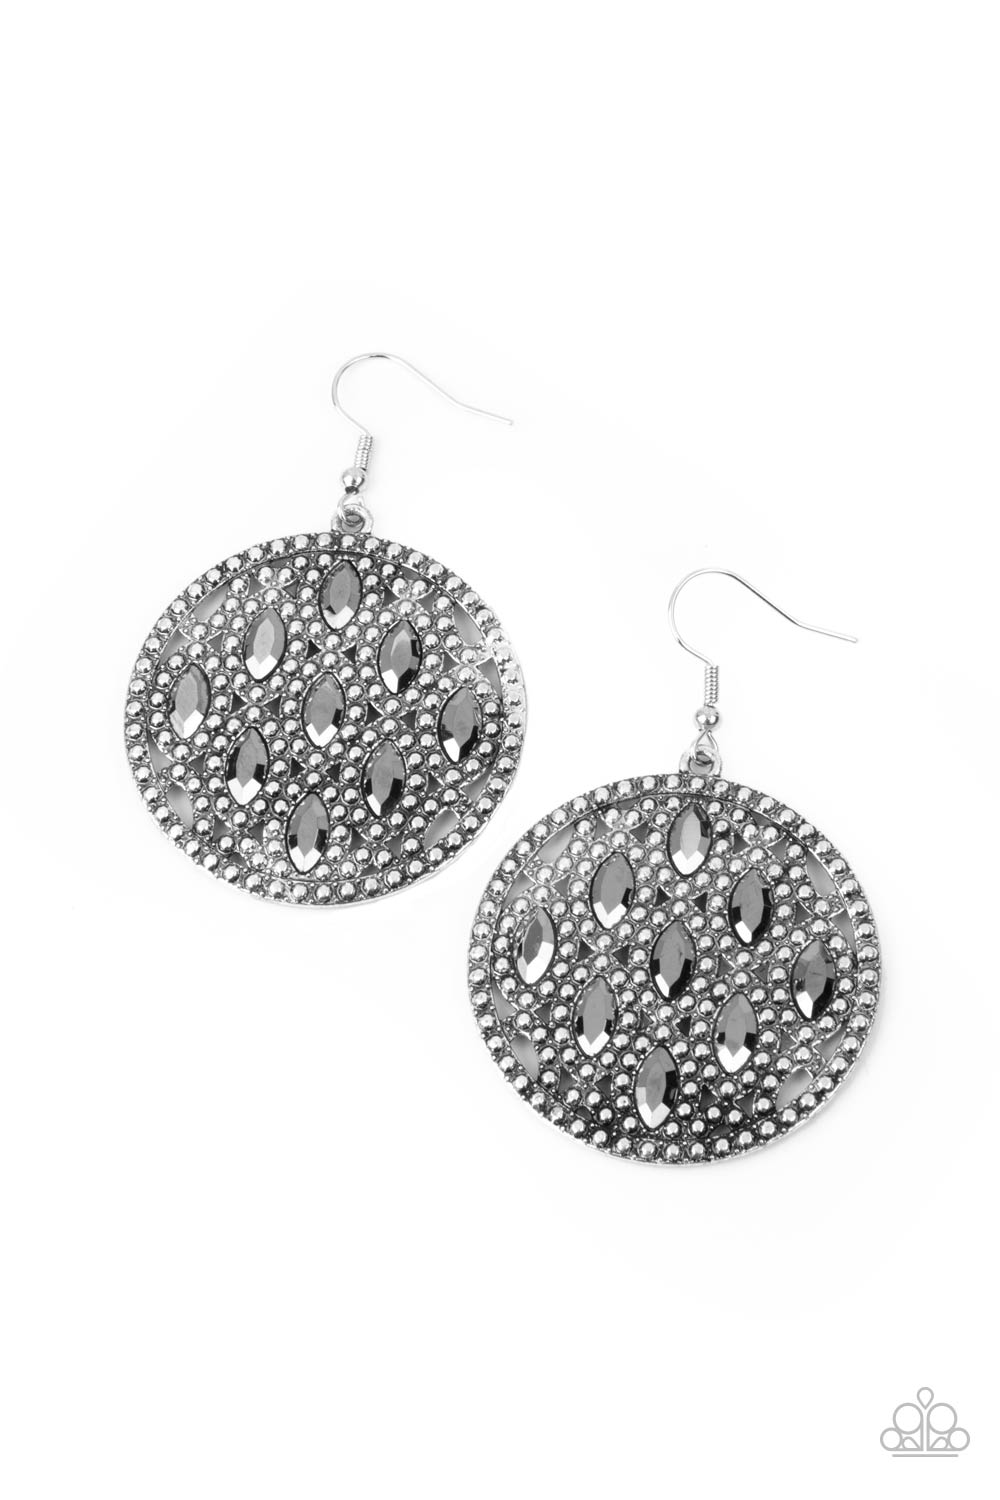 Paparazzi Accessories earrings - Featuring regal marquise cuts, smoky hematite rhinestones embellish the front of a studded silver frame, creating a stunning statement piece. Earring attaches to a standard fishhook fitting.  All Paparazzi Accessories are nickel free and lead free.